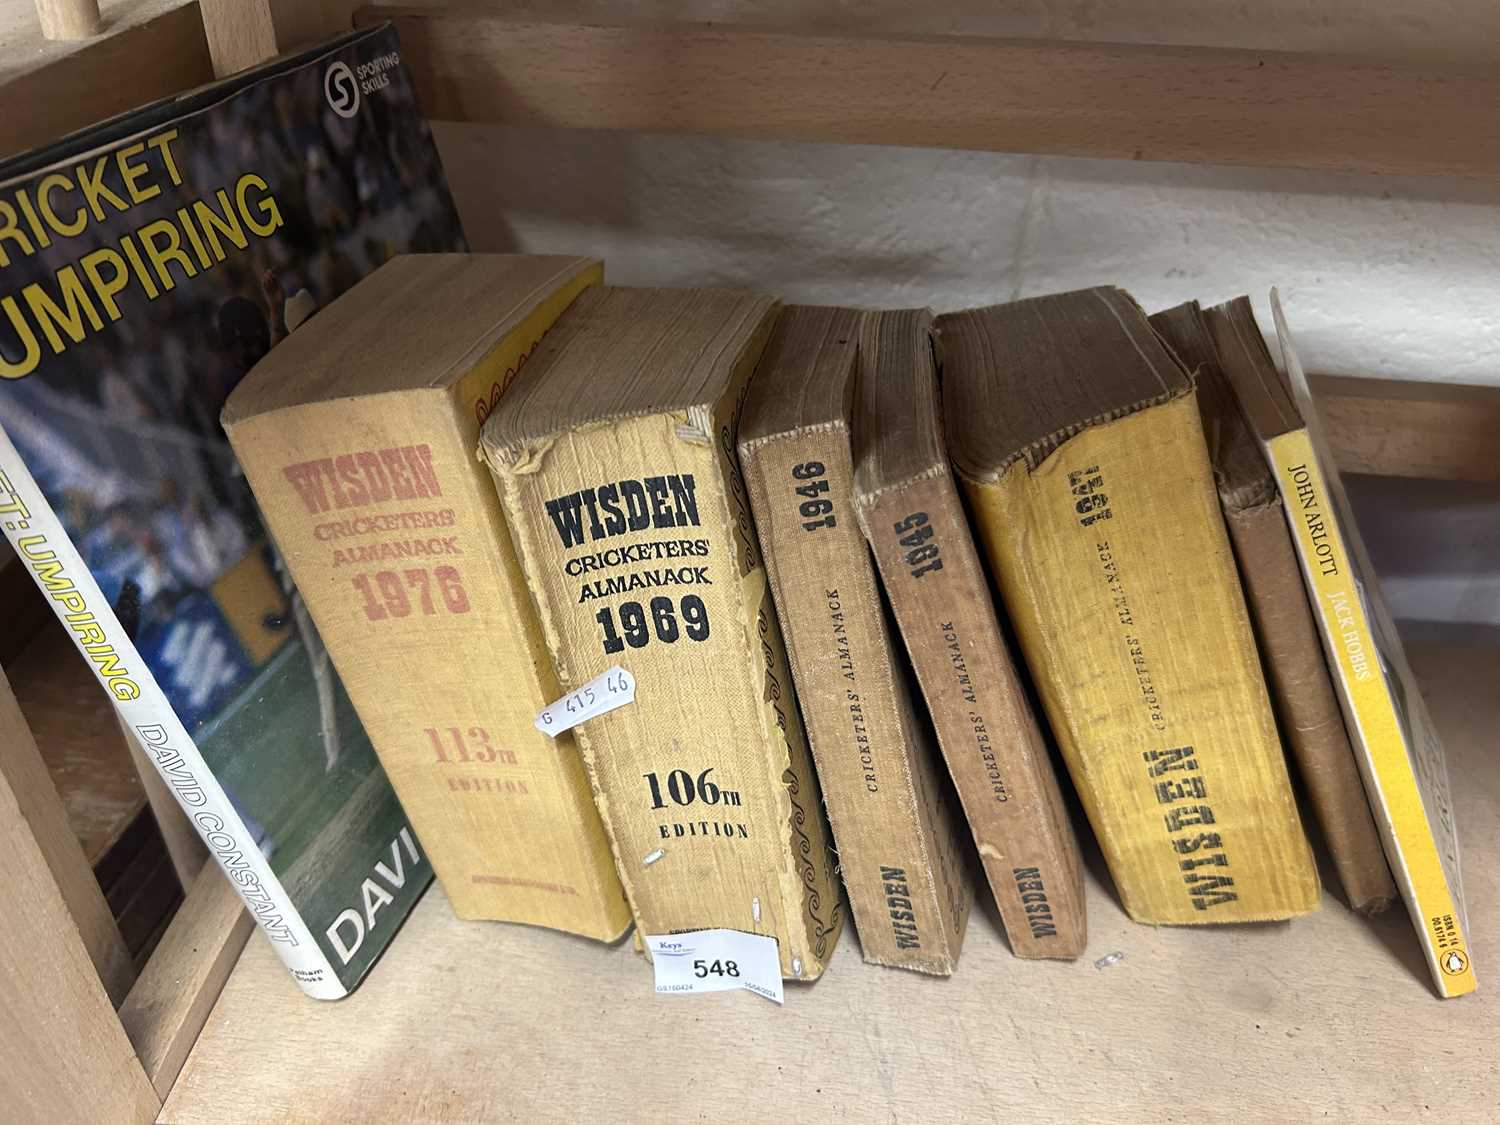 Quantity of Wisden Cricketers Almanac and others